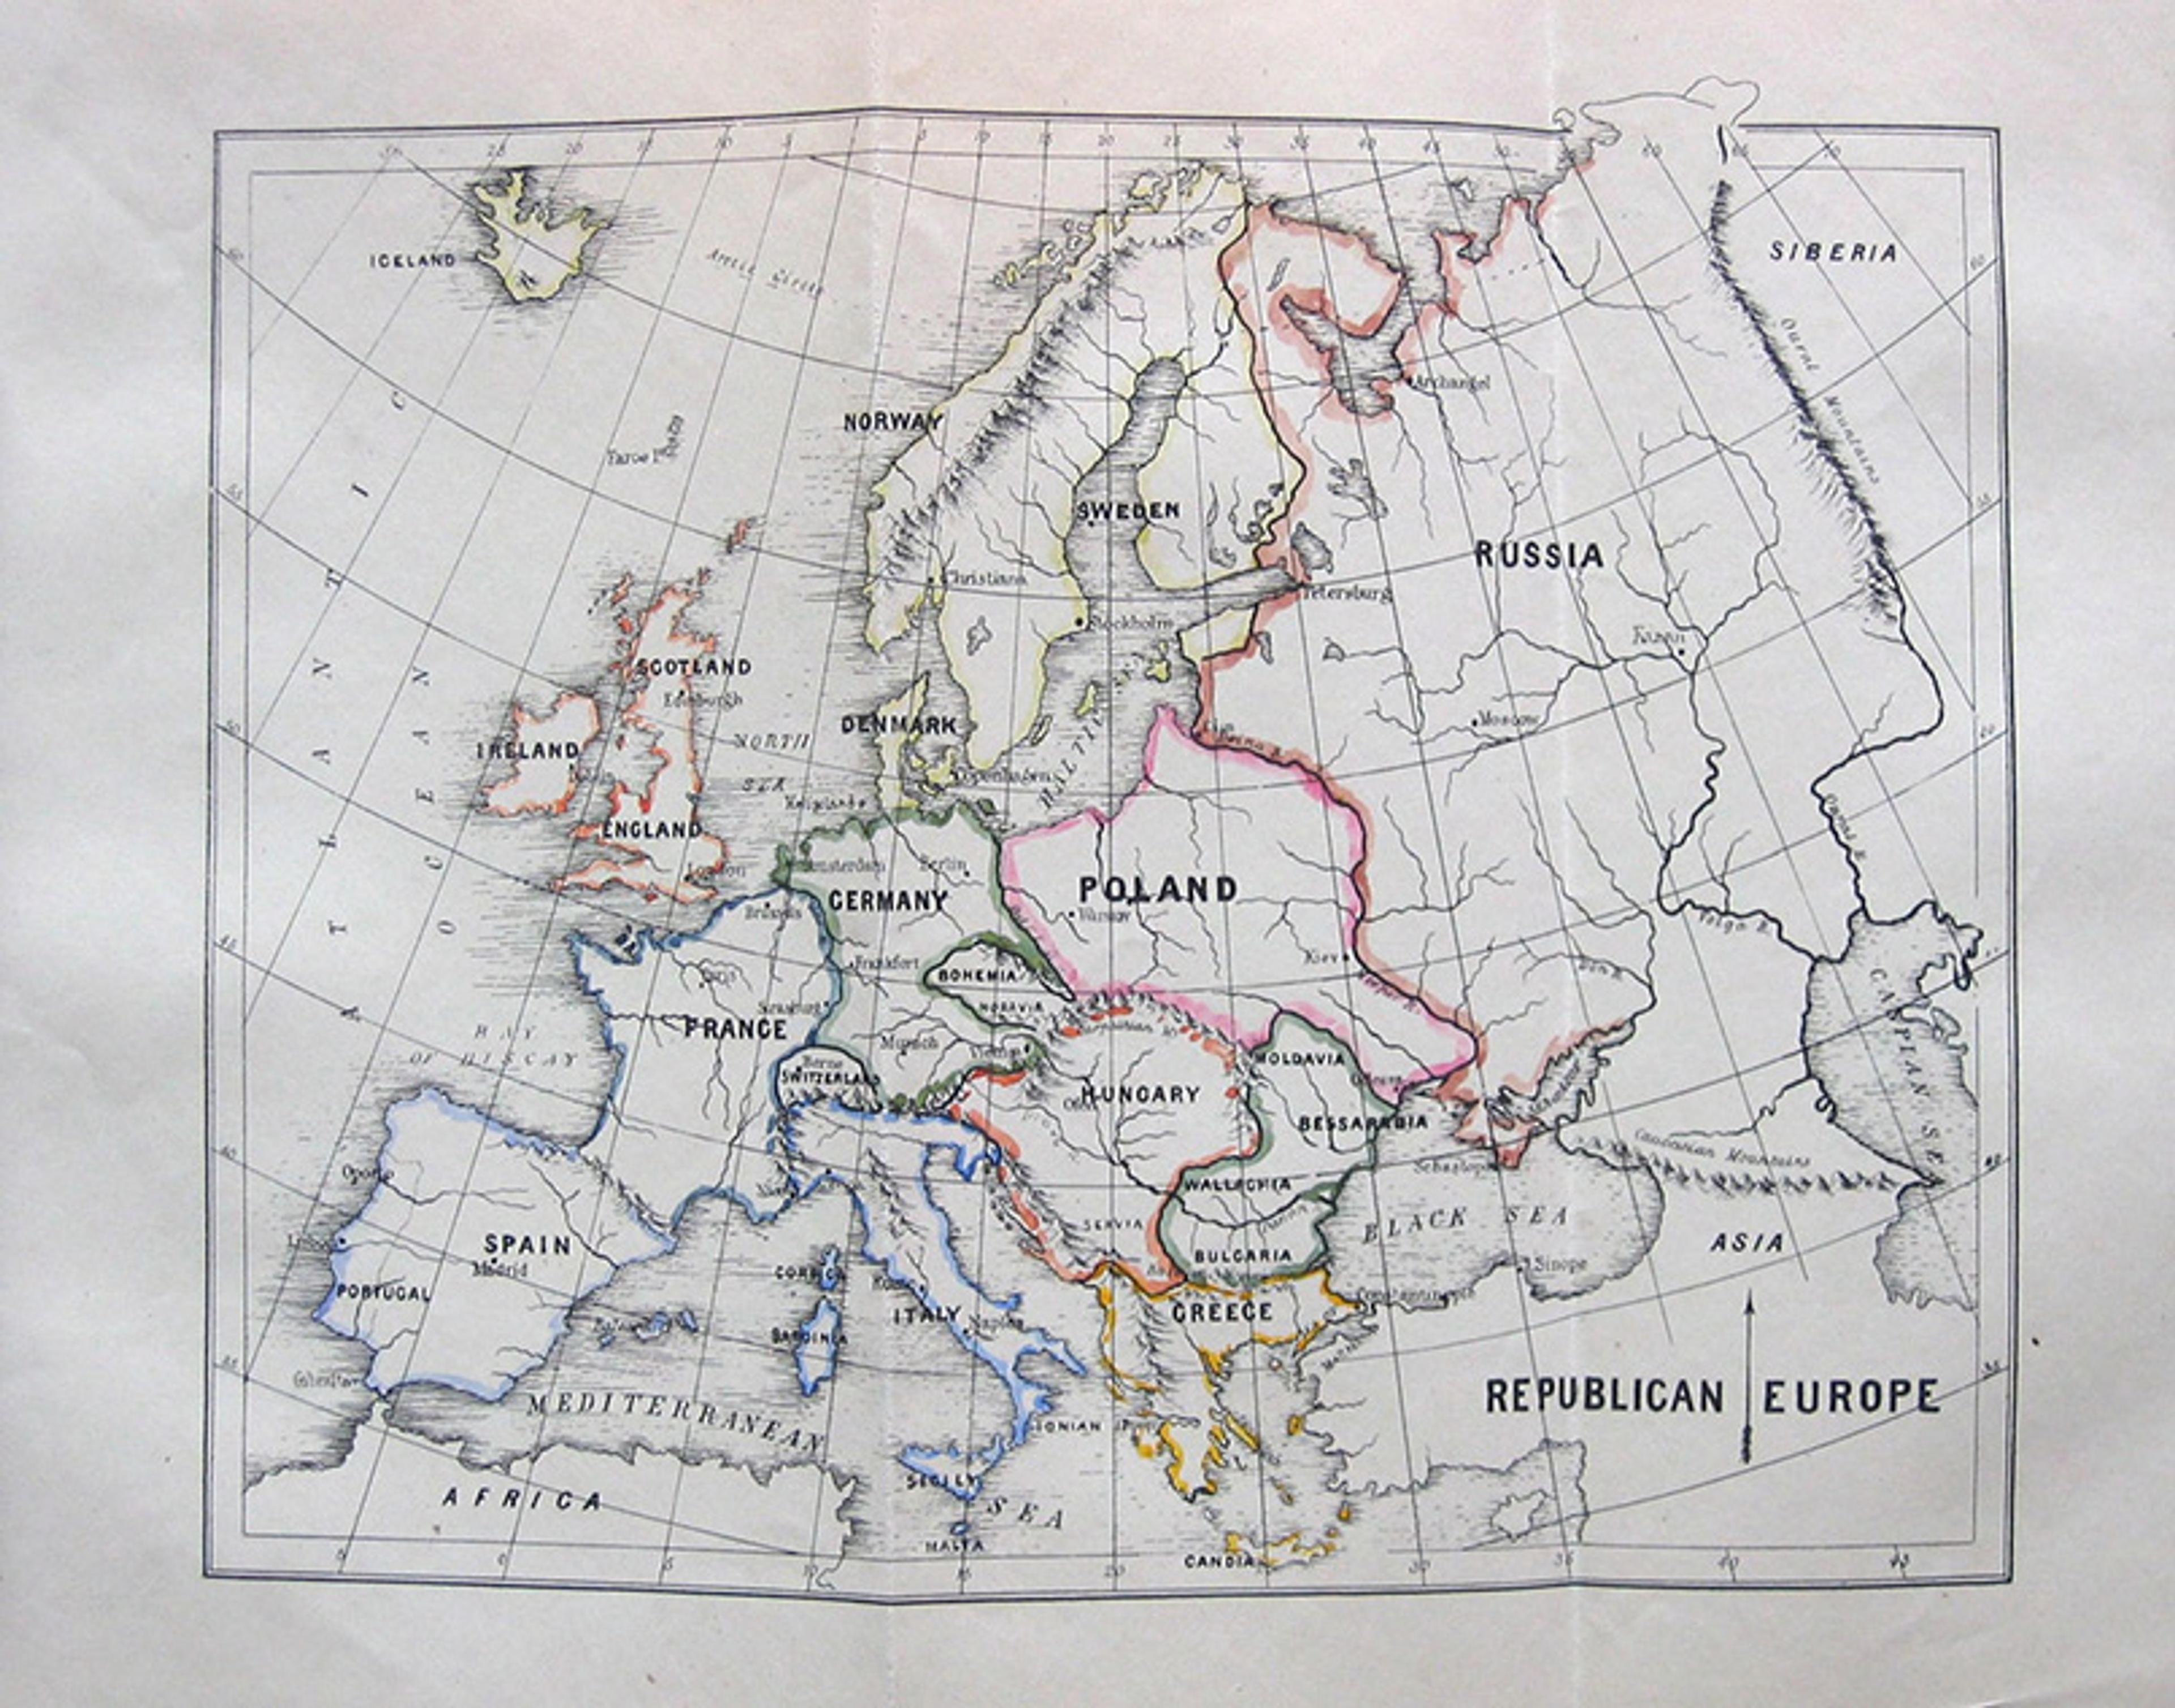 Antique map of Europe, highlighting historical borders and countries including Poland, Russia, Germany, France, Italy, and Spain, with labels in English.